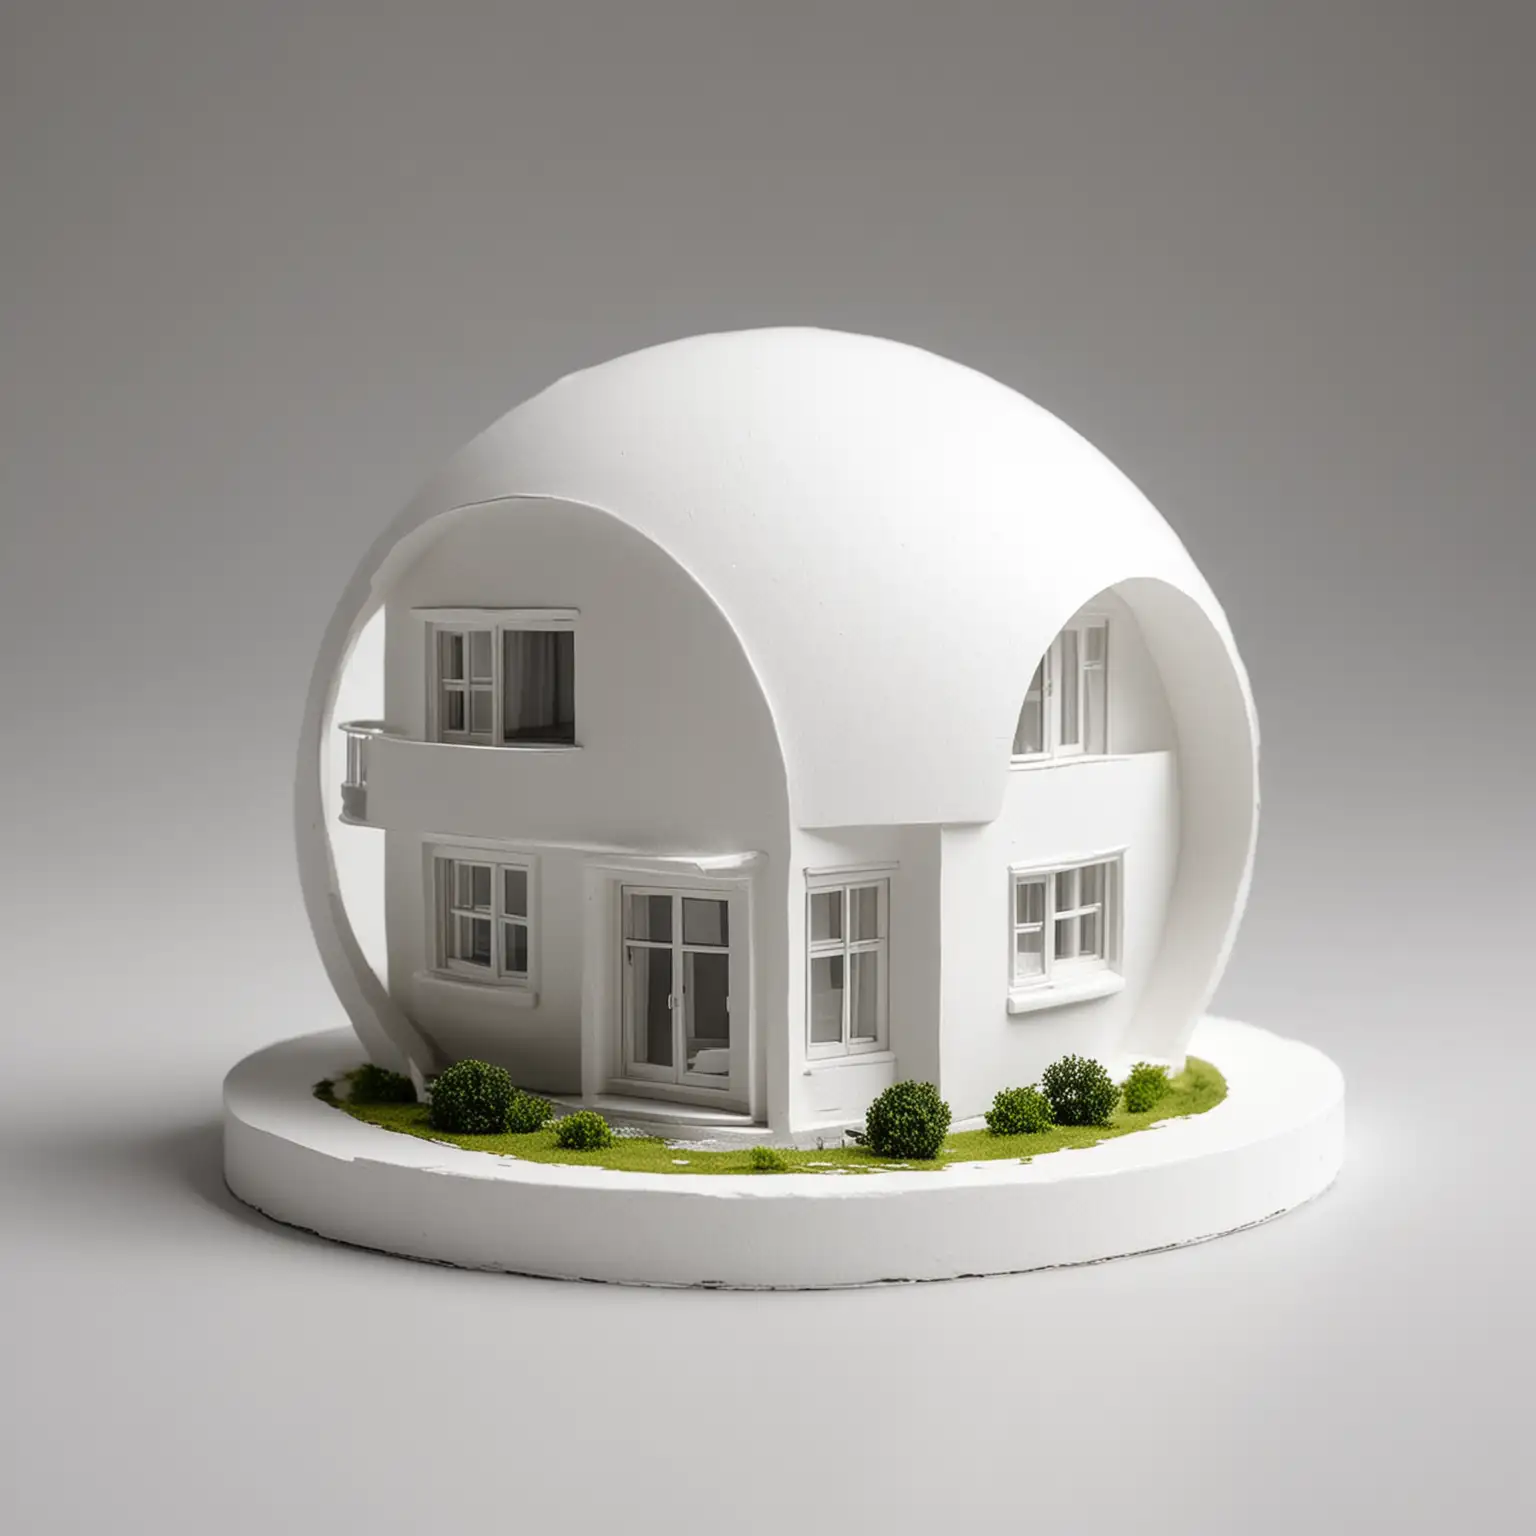 Minimalist White Sphere House on Clean Background